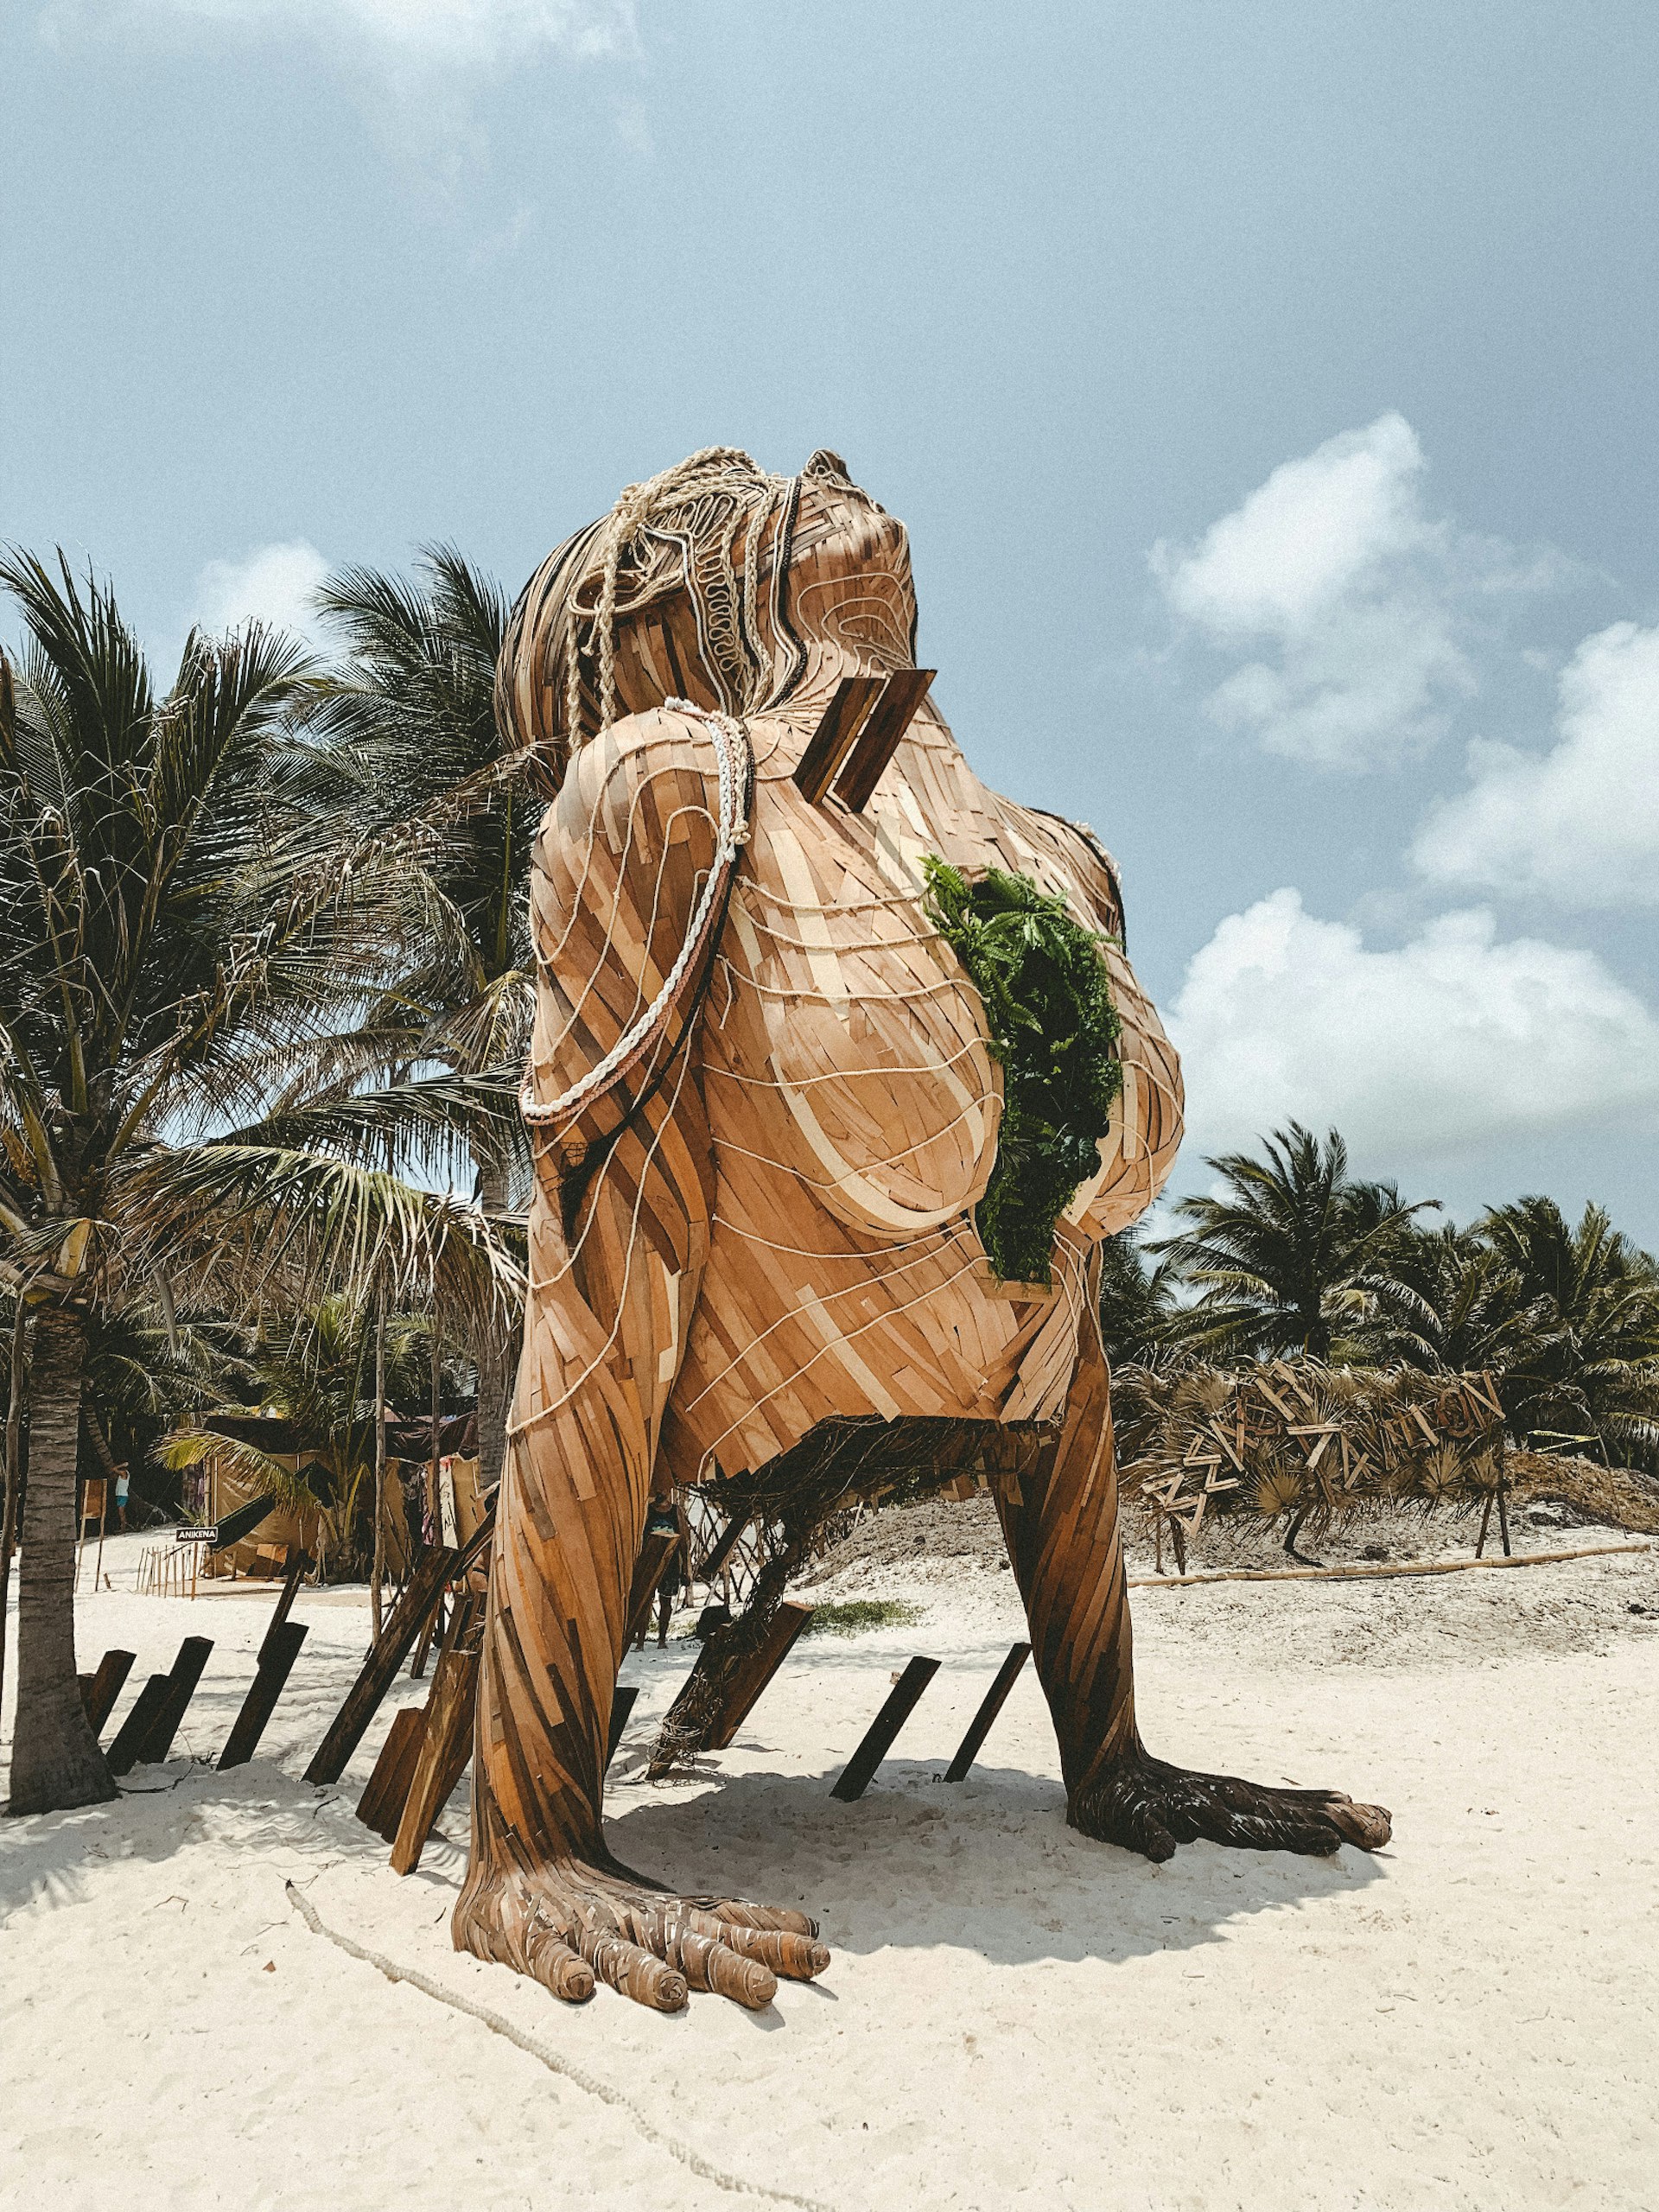 A huge wooden statue on a sunny beach of a woman's torso with hands splayed out on the sand, and face upturned to the sky; it wears a necklace of green leaves, and there are palm trees behind.